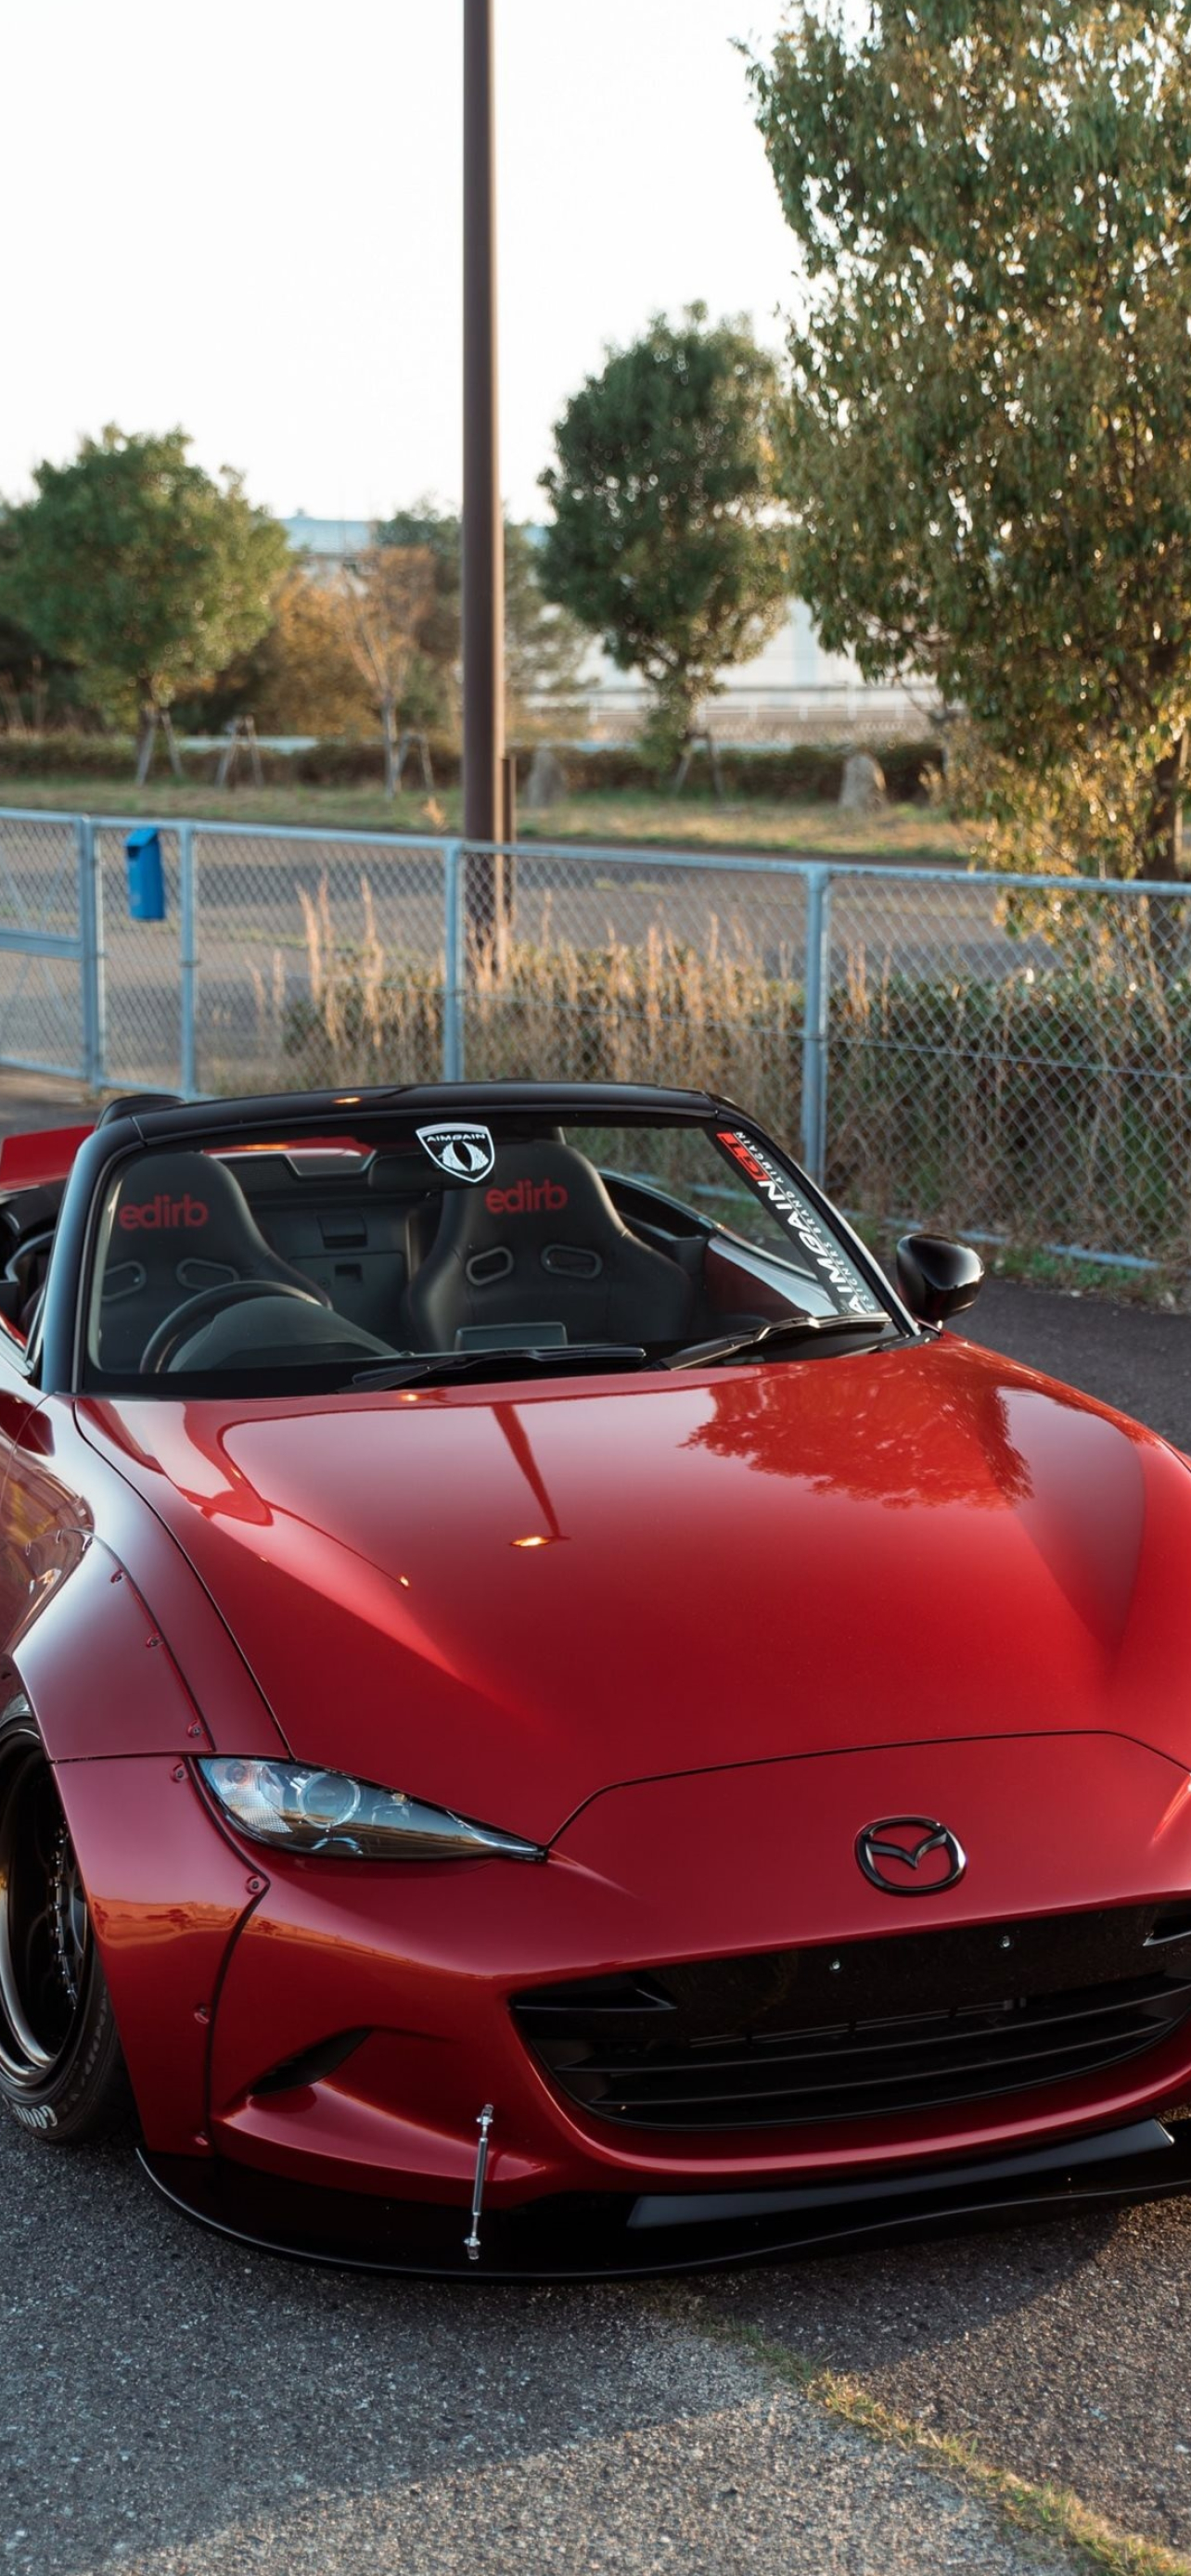 Mazda MX-5 Miata, Stunning iPhone wallpapers, High-definition visuals, Car enthusiasts' delight, 1290x2780 HD Phone